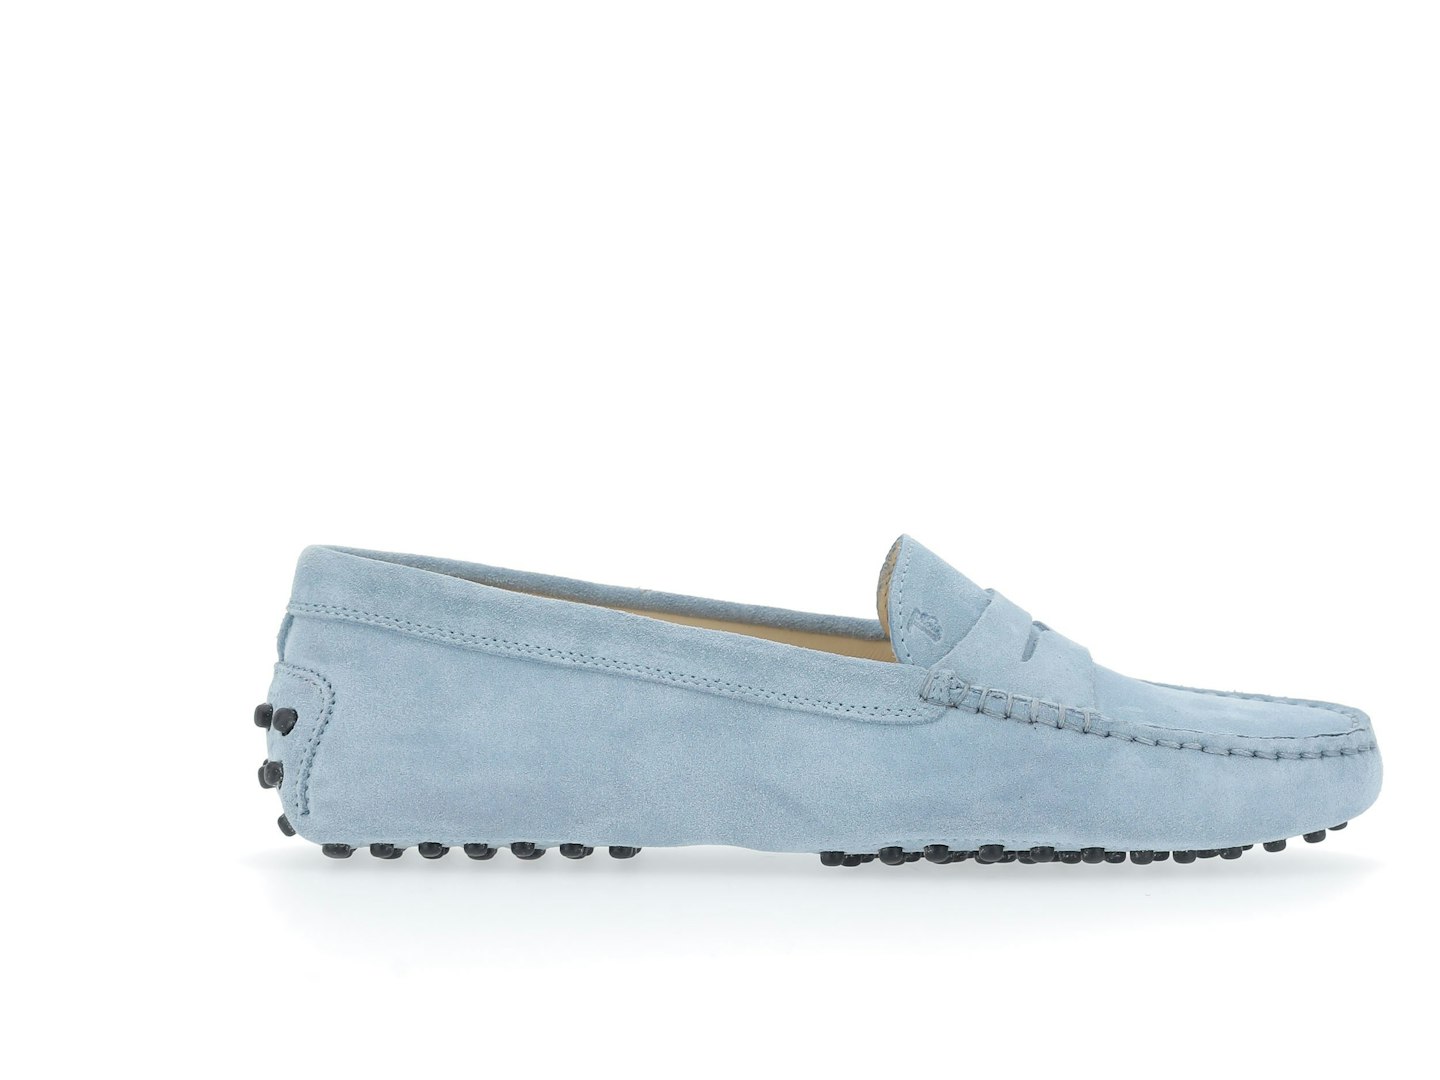 Tod's, Gommino Driving Shoes In Suede Light Blue, £360